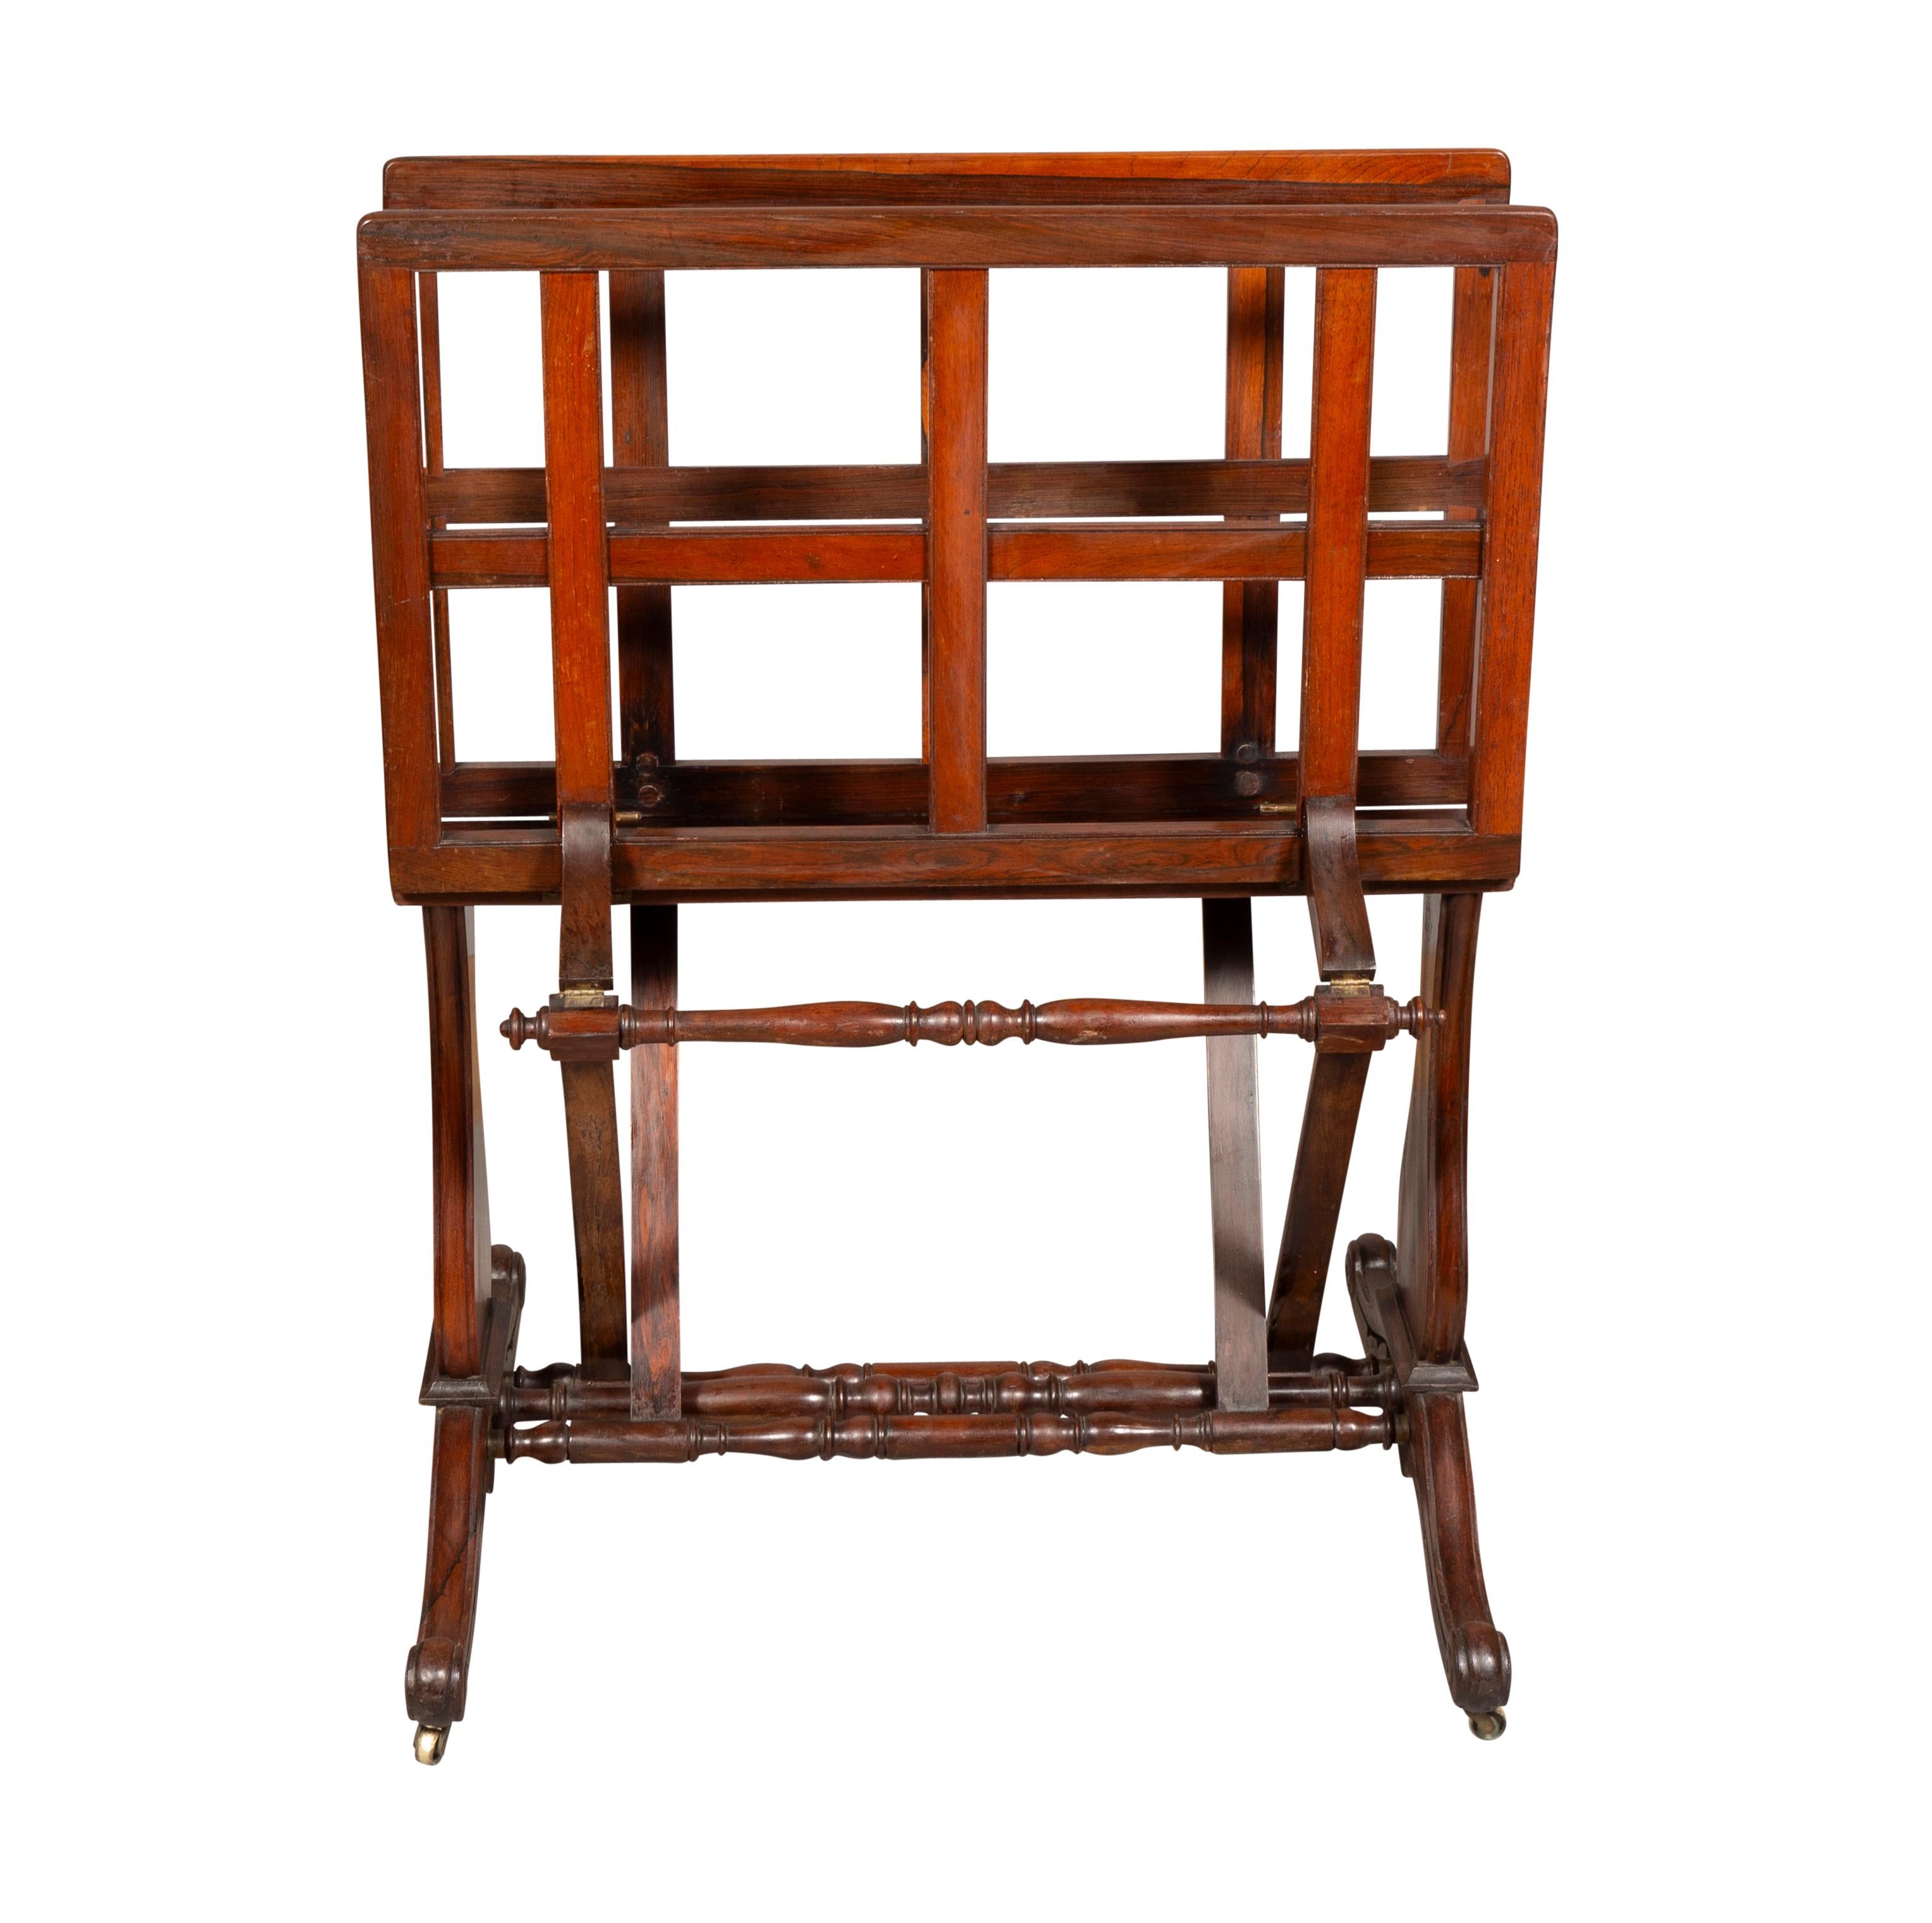 The angle of the rack is adjustable with your foot lifting up on the bottom rail. Constructed of solid rosewood. Handy for prints, paintings or poster collections. Also for artists displaying their works.